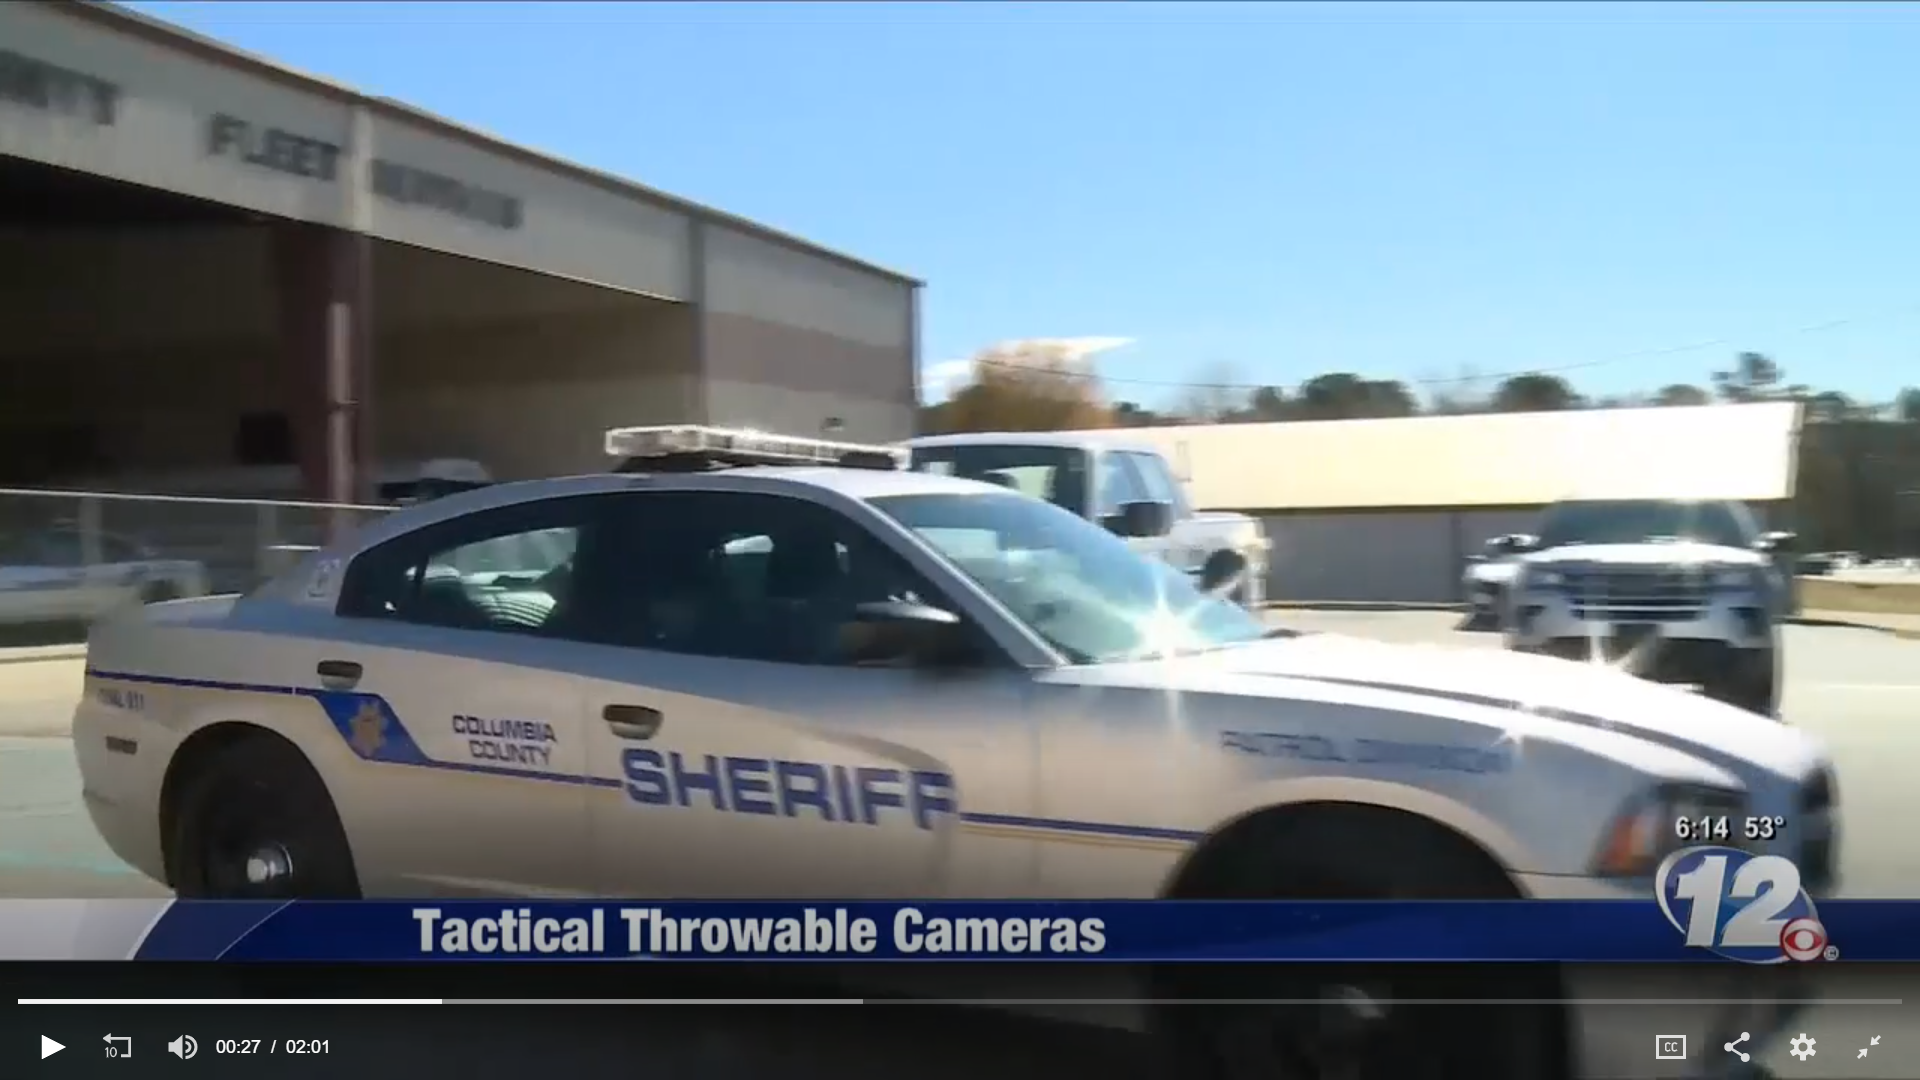 Columbia County, GA – Using our 4G cameras across police, fire, and EMA